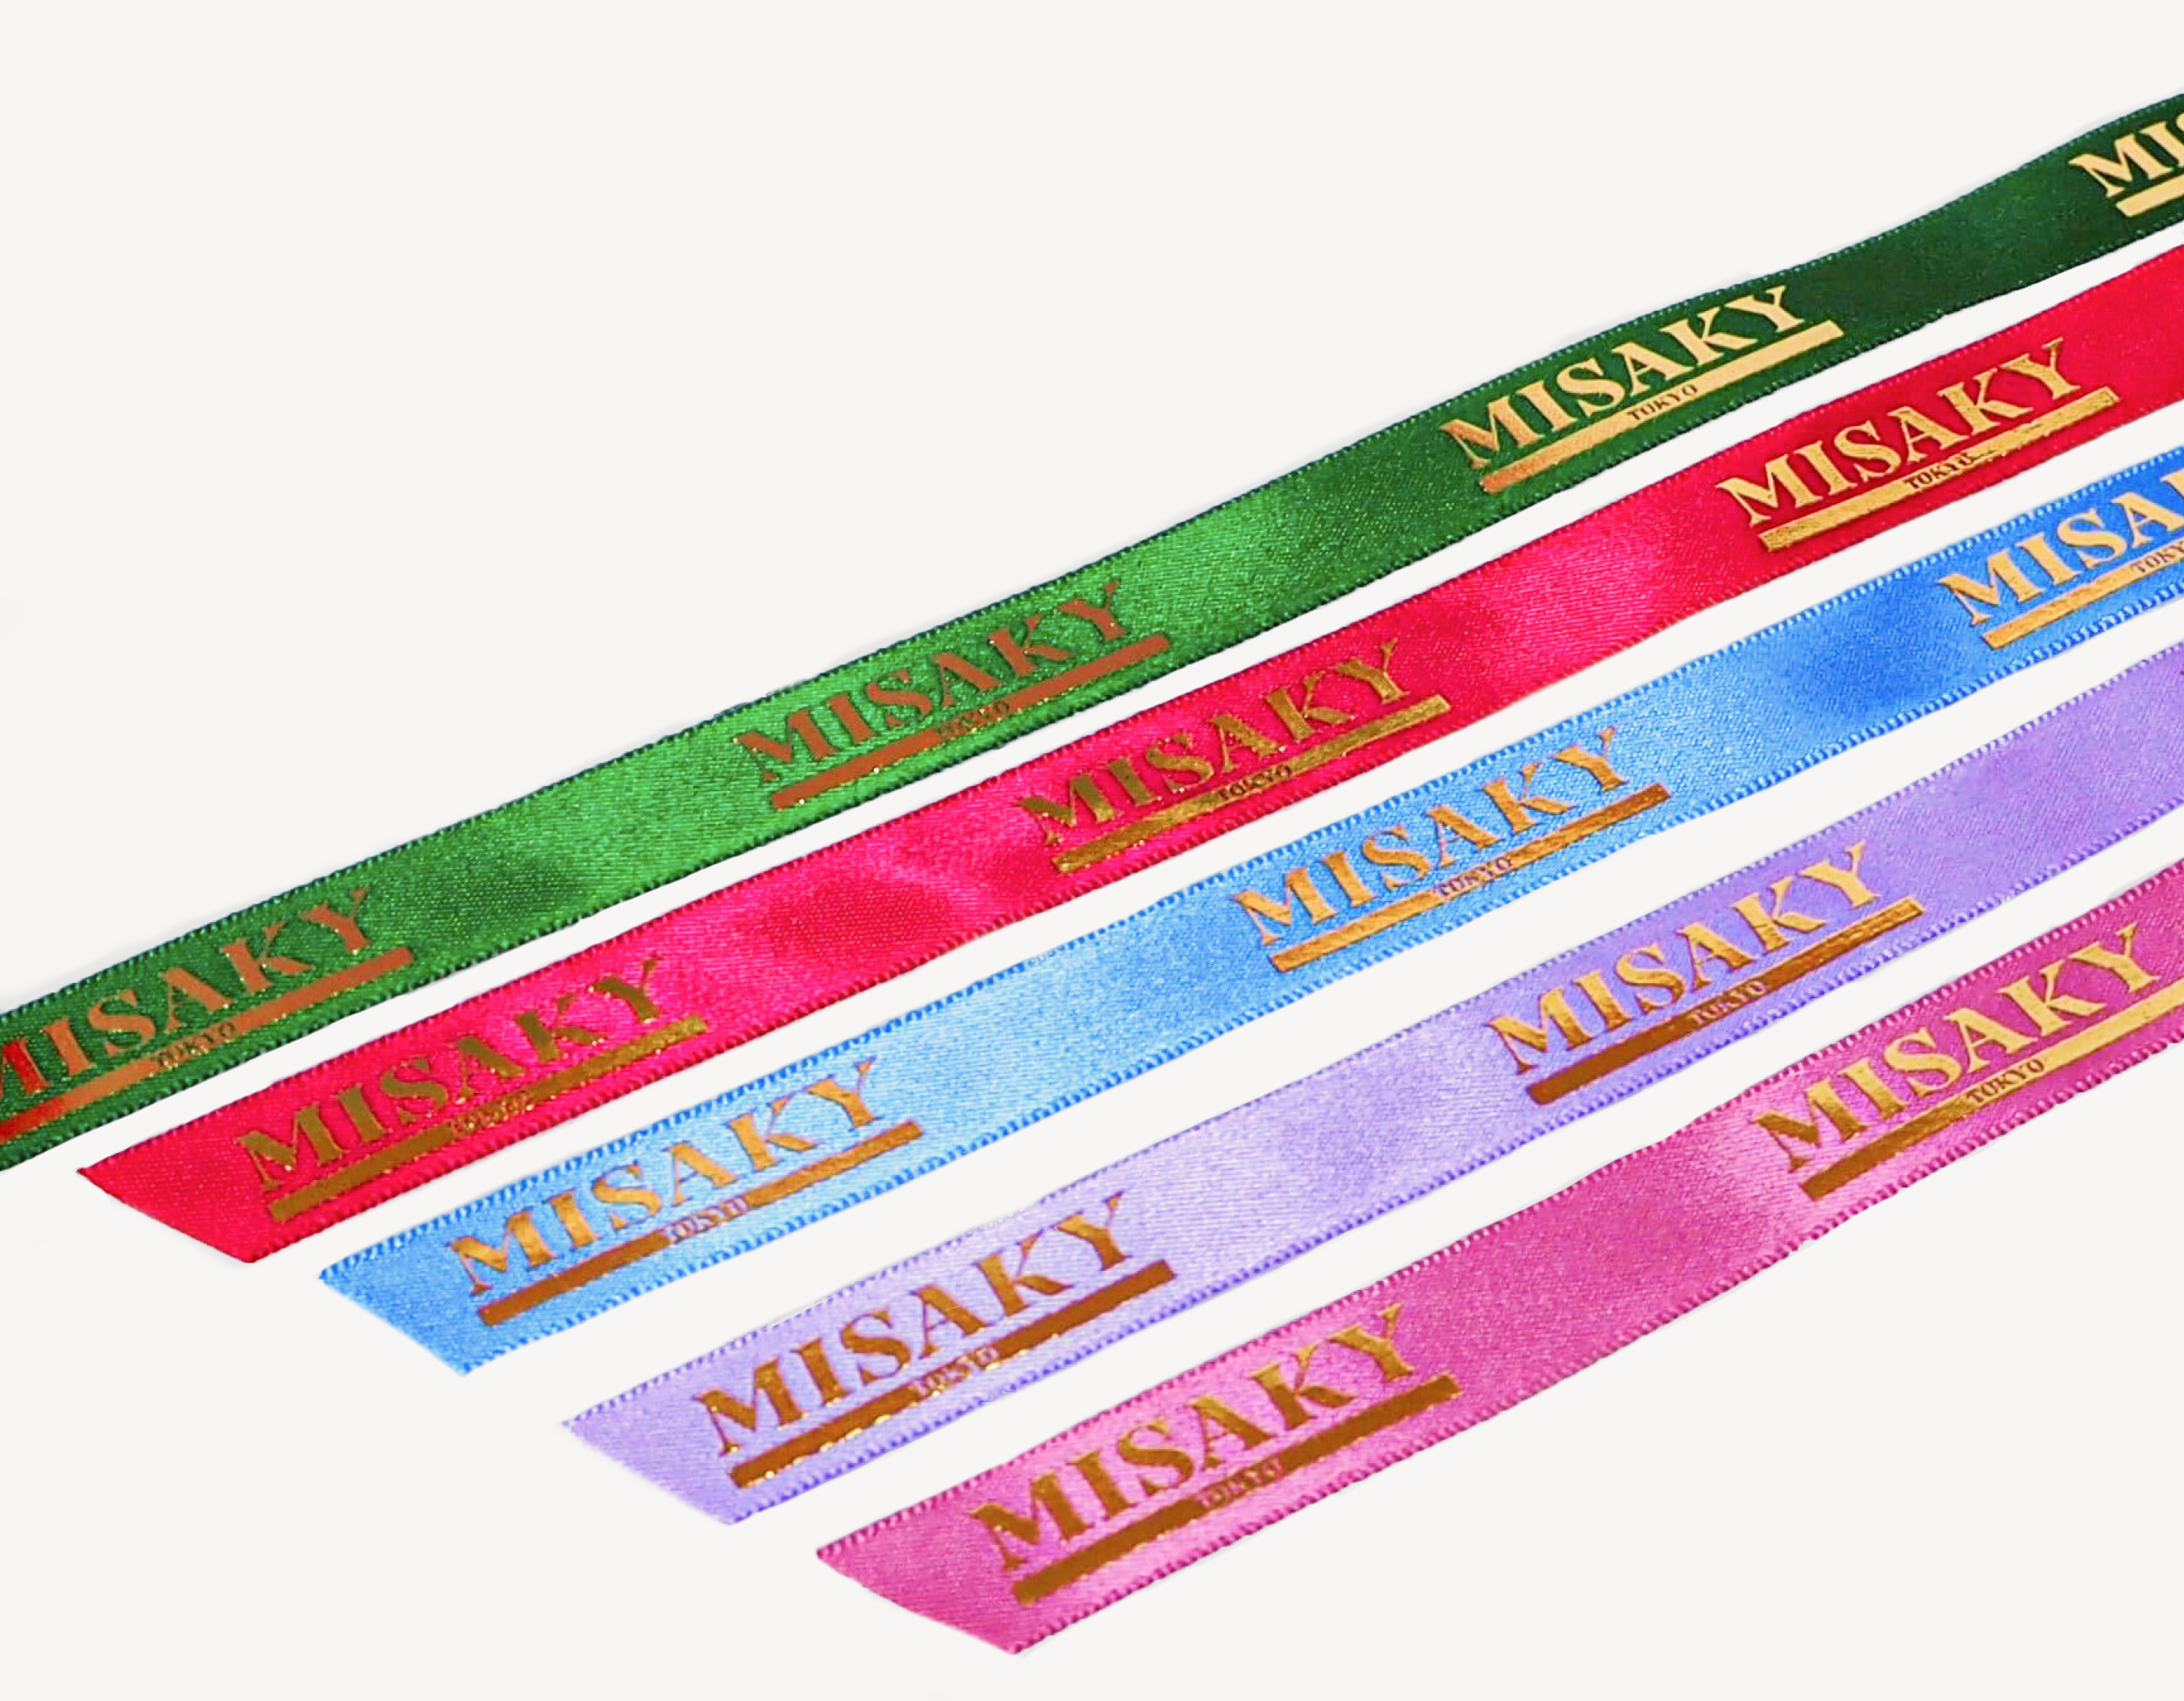 Four colorful satin ribbons arranged diagonally on a white background, each with 'MISAKI' printed in gold letters. From top to bottom, the ribbons are green, red, blue, and pink.